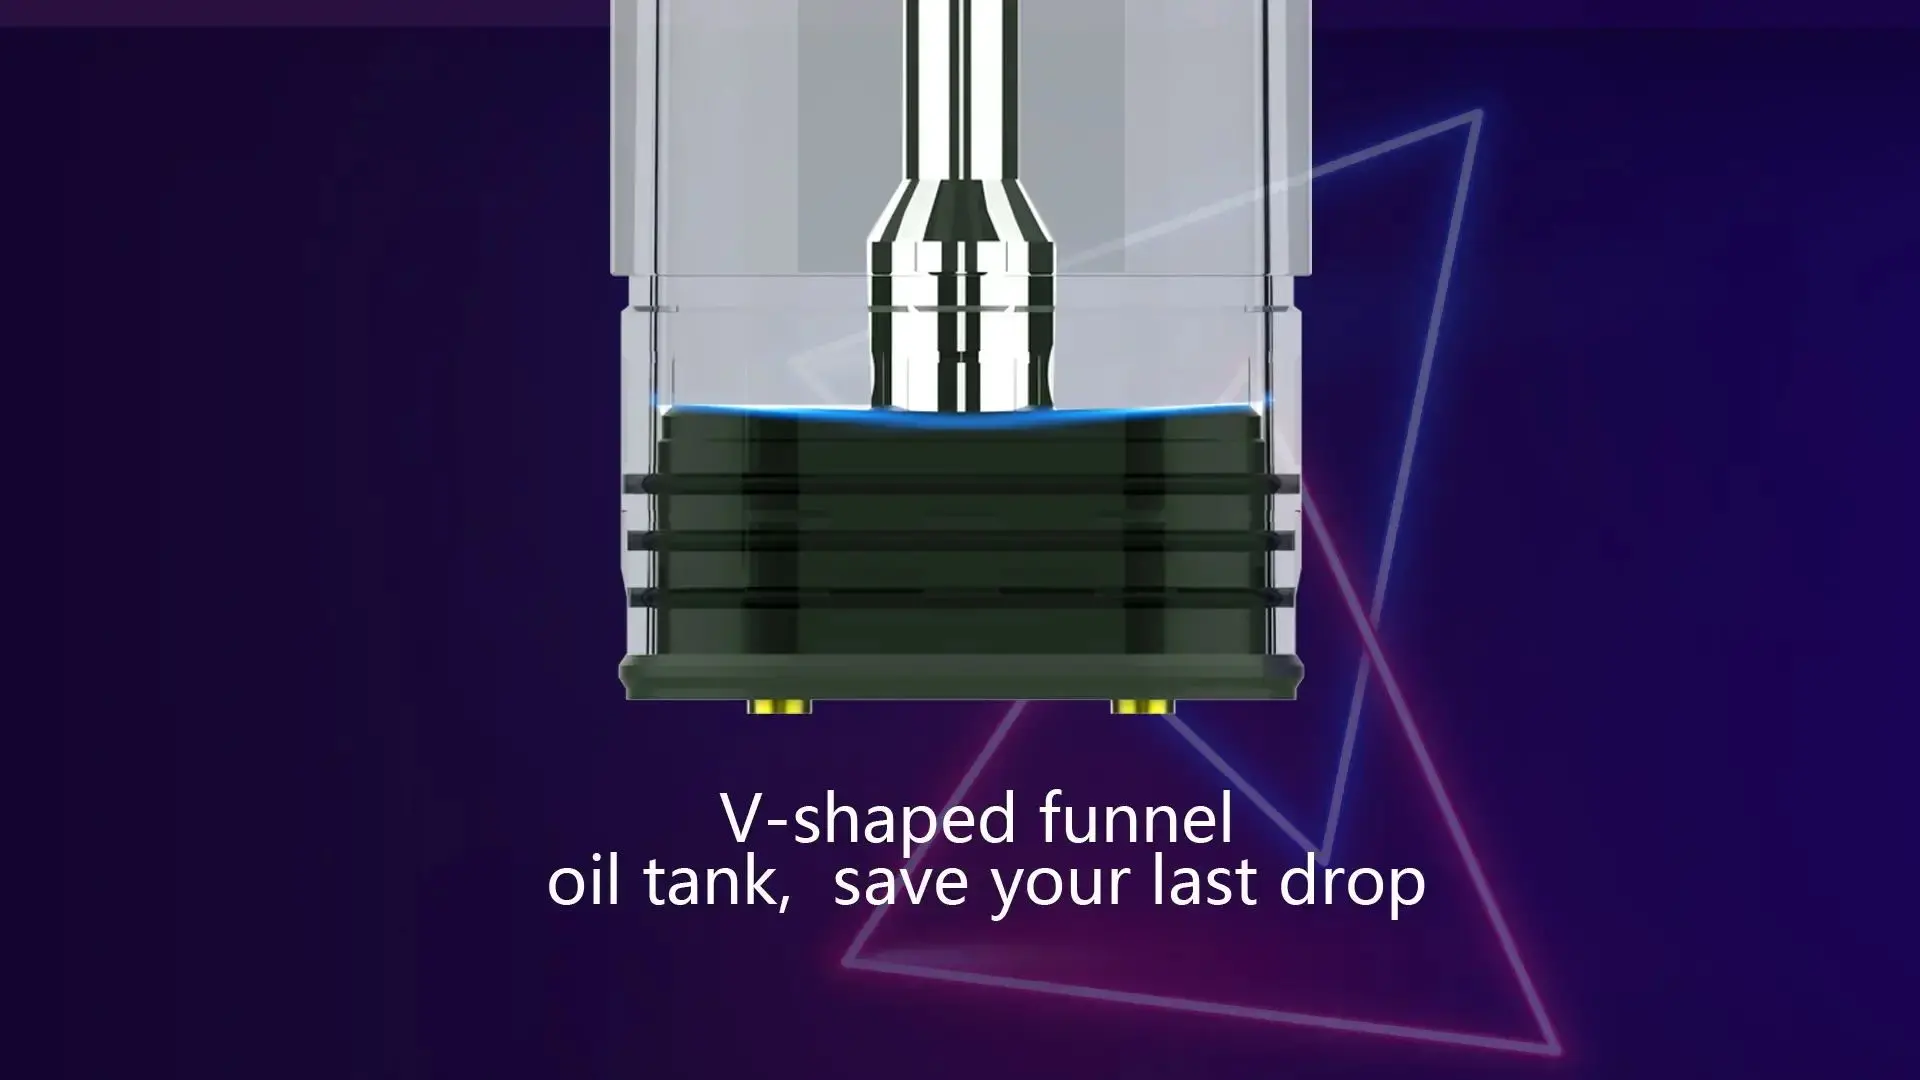 V-shaped funnel oil tank, save your last drop